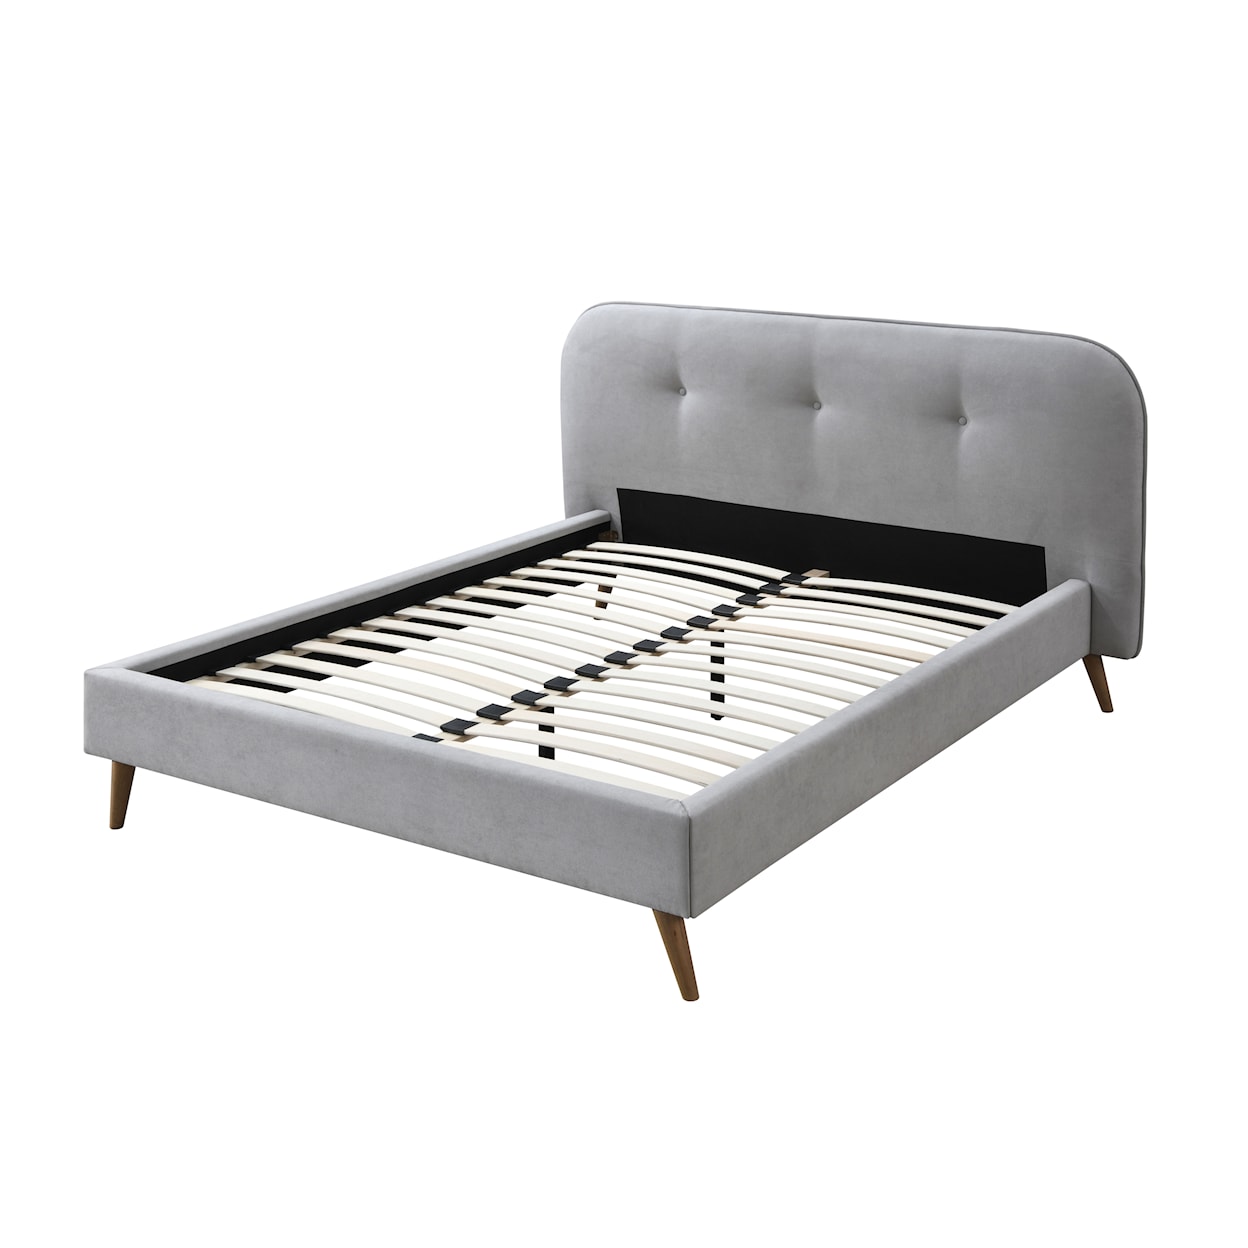 Acme Furniture Graves King Size Bed